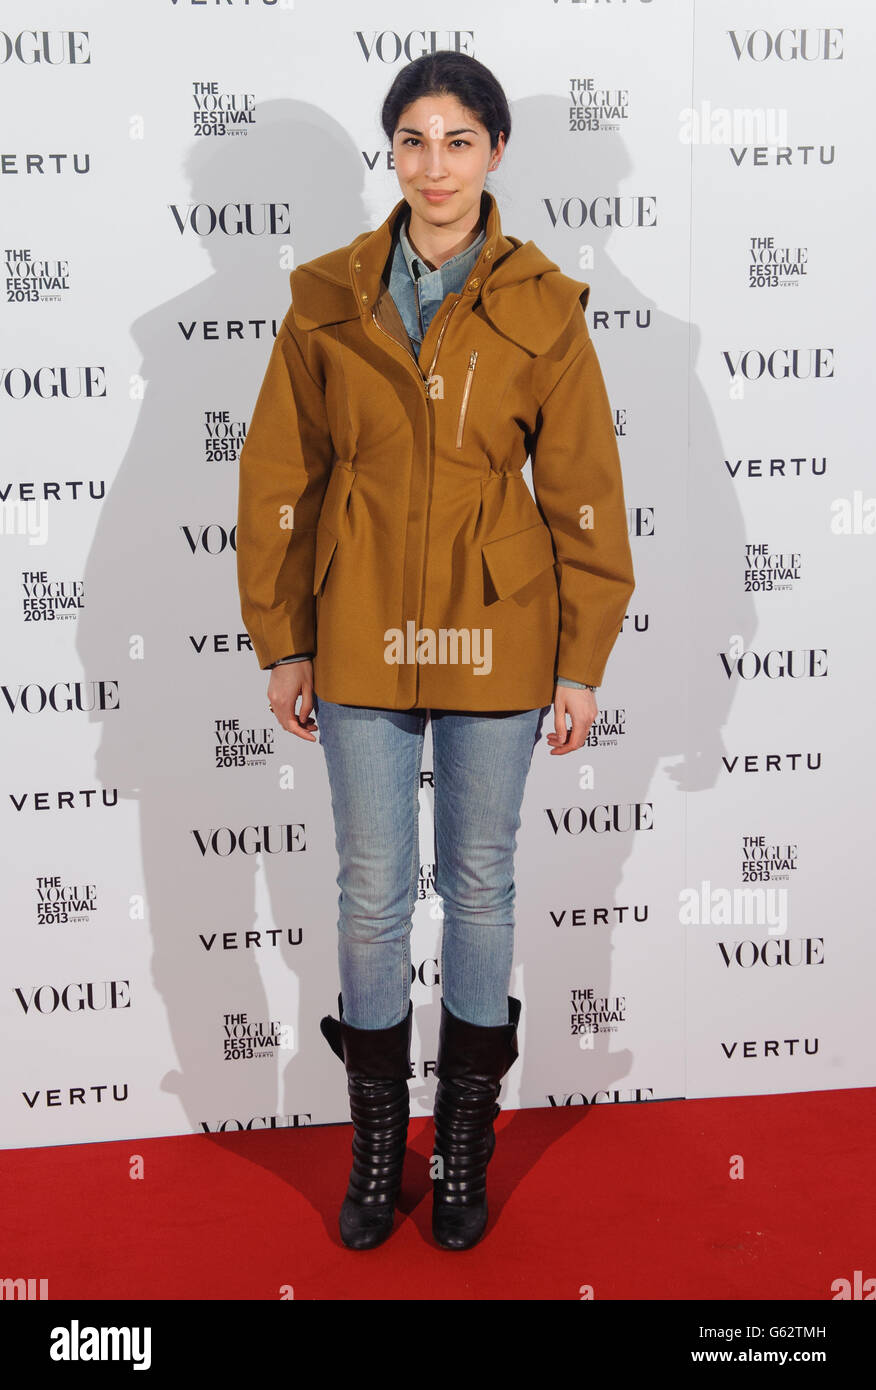 Vogue Festival Opening Party - London Stockfoto